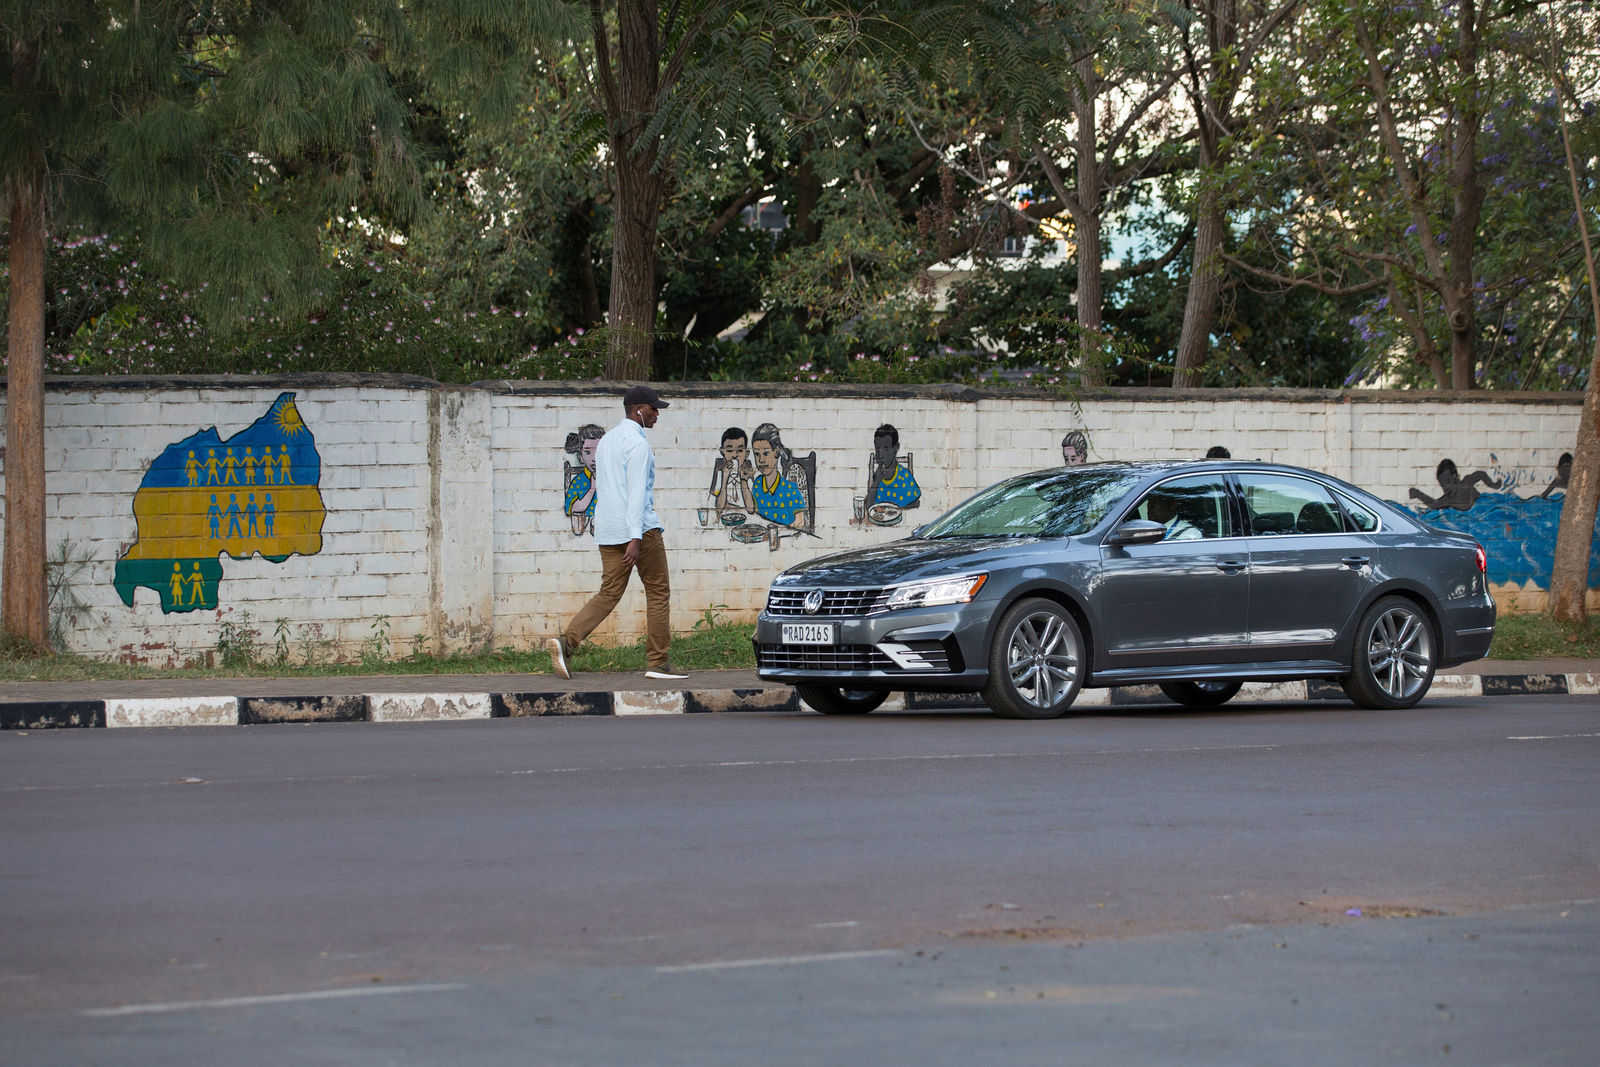 Milestone in Africa: Volkswagen launches local assembly and Car sharing in Rwanda